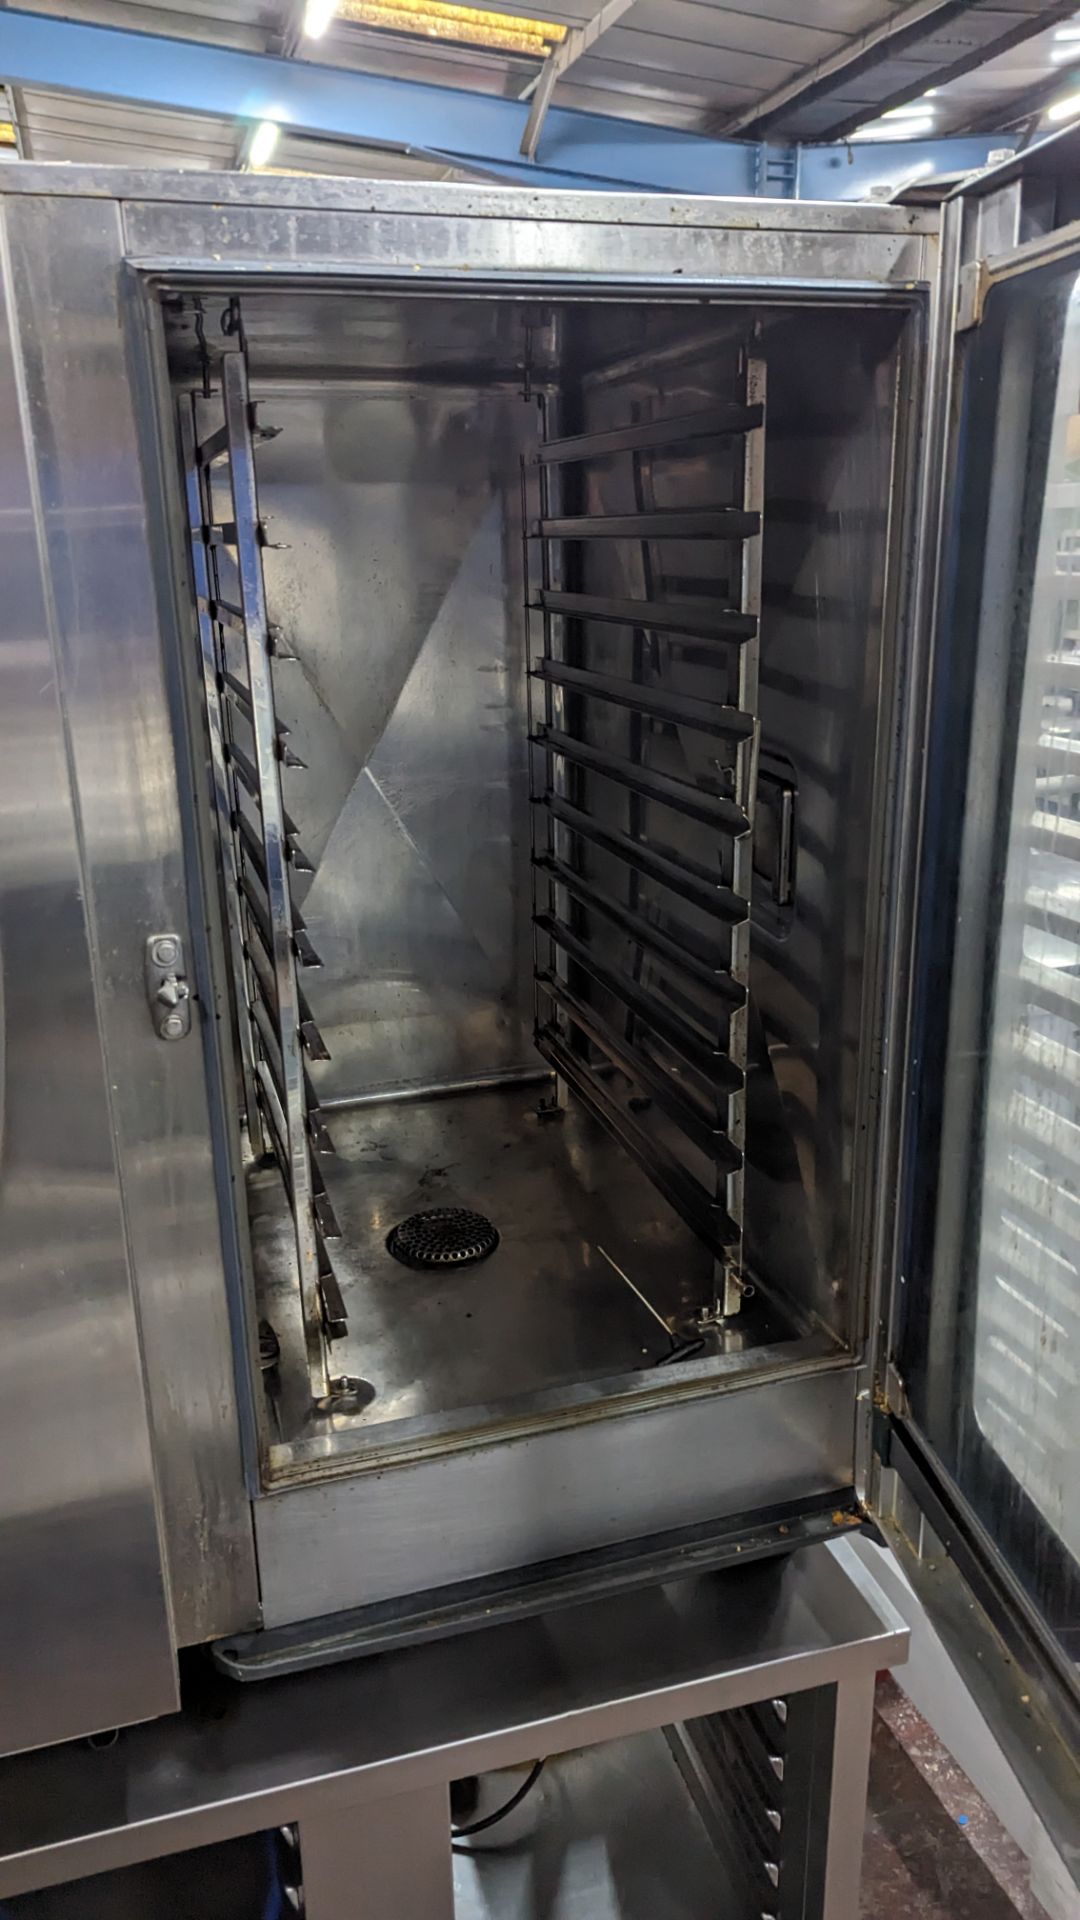 Rational self-cooking center 10 grid oven on dedicated stand with built-in rails for holding trays - Image 6 of 11